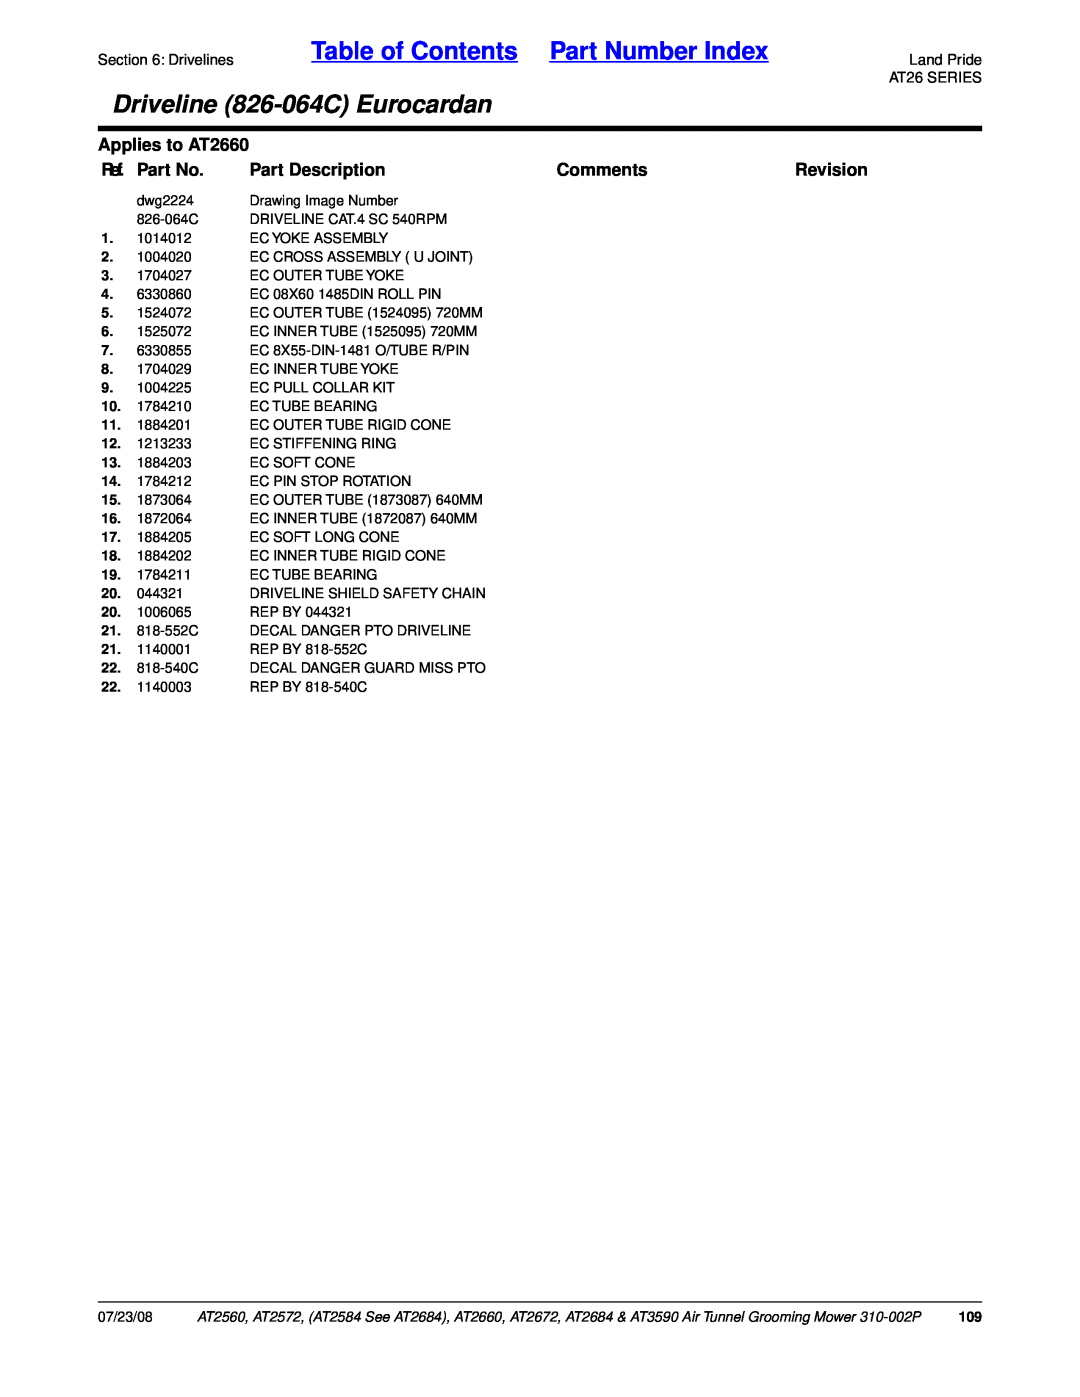 Land Pride Table of Contents Part Number Index, Driveline 826-064CEurocardan, Applies to AT2660, Ref. Part No, Comments 